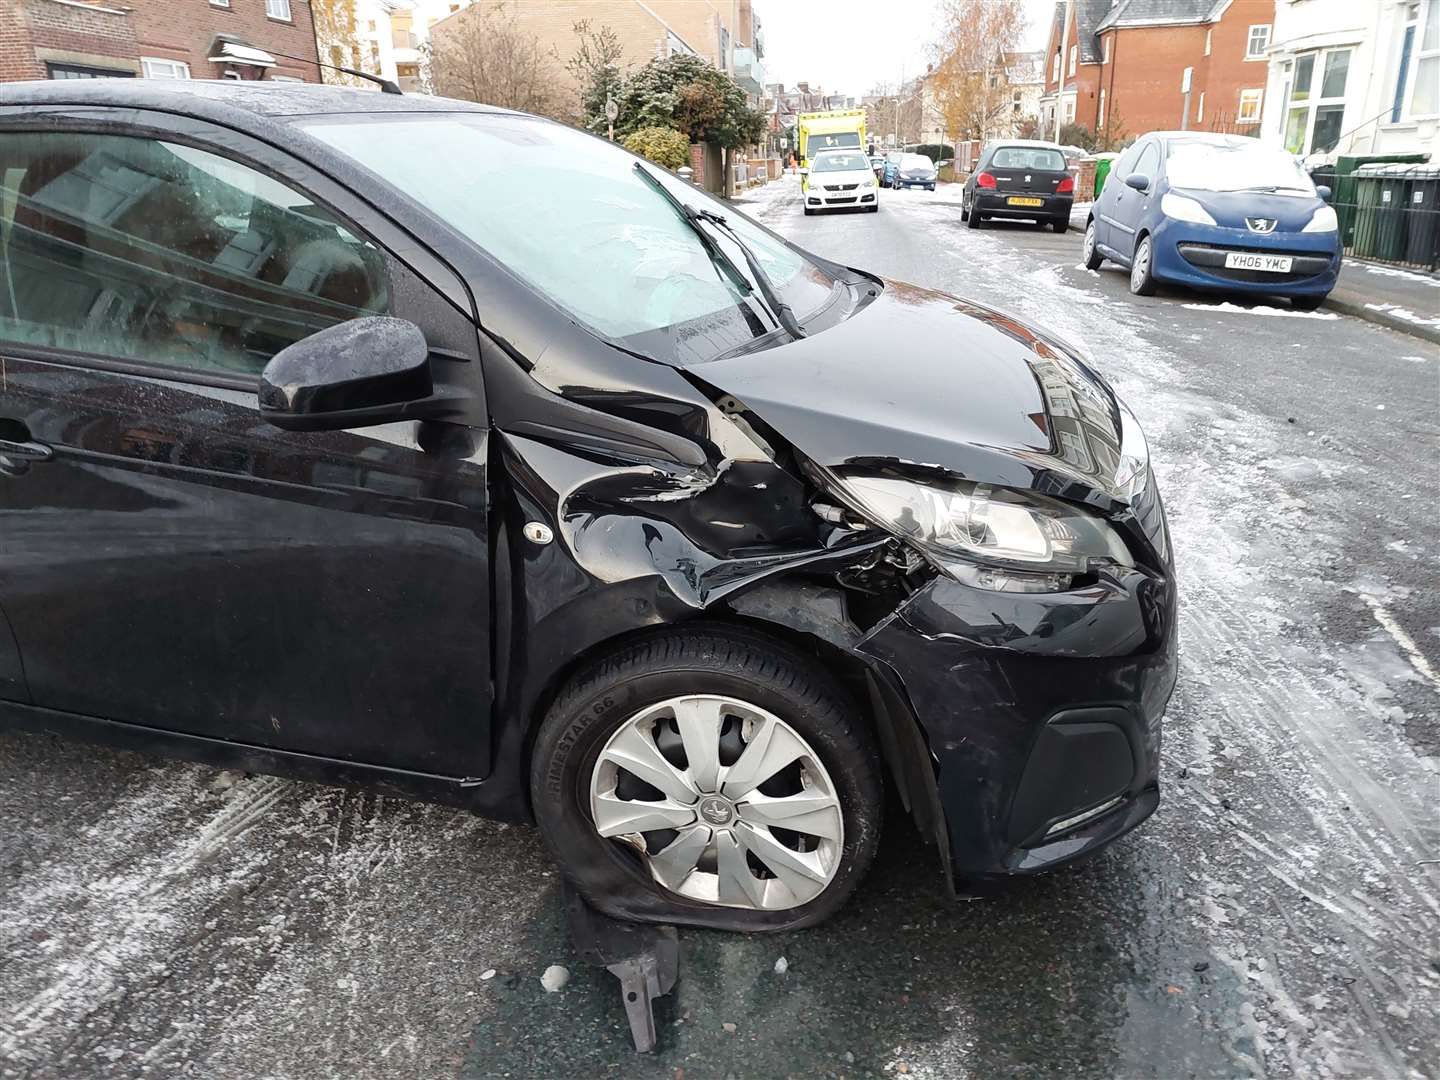 The Peugeot 108 was broadside across the road